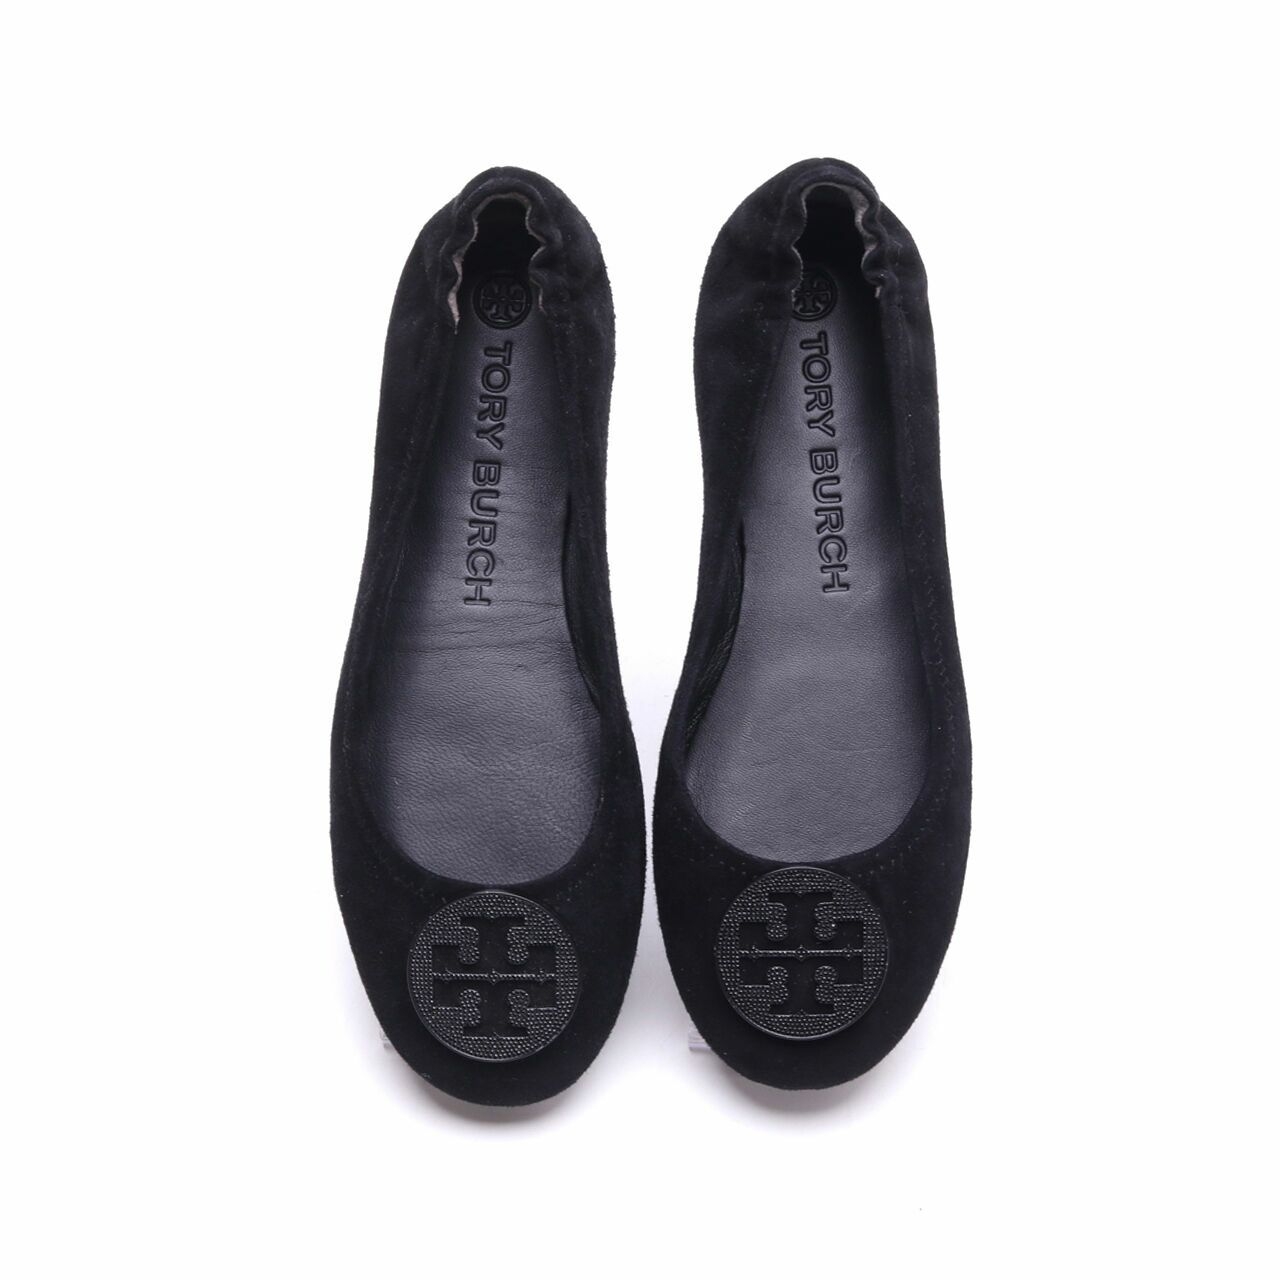 Tory Burch Minnie Travel Ballet with Pave Logo Perfect Black Flats Shoes